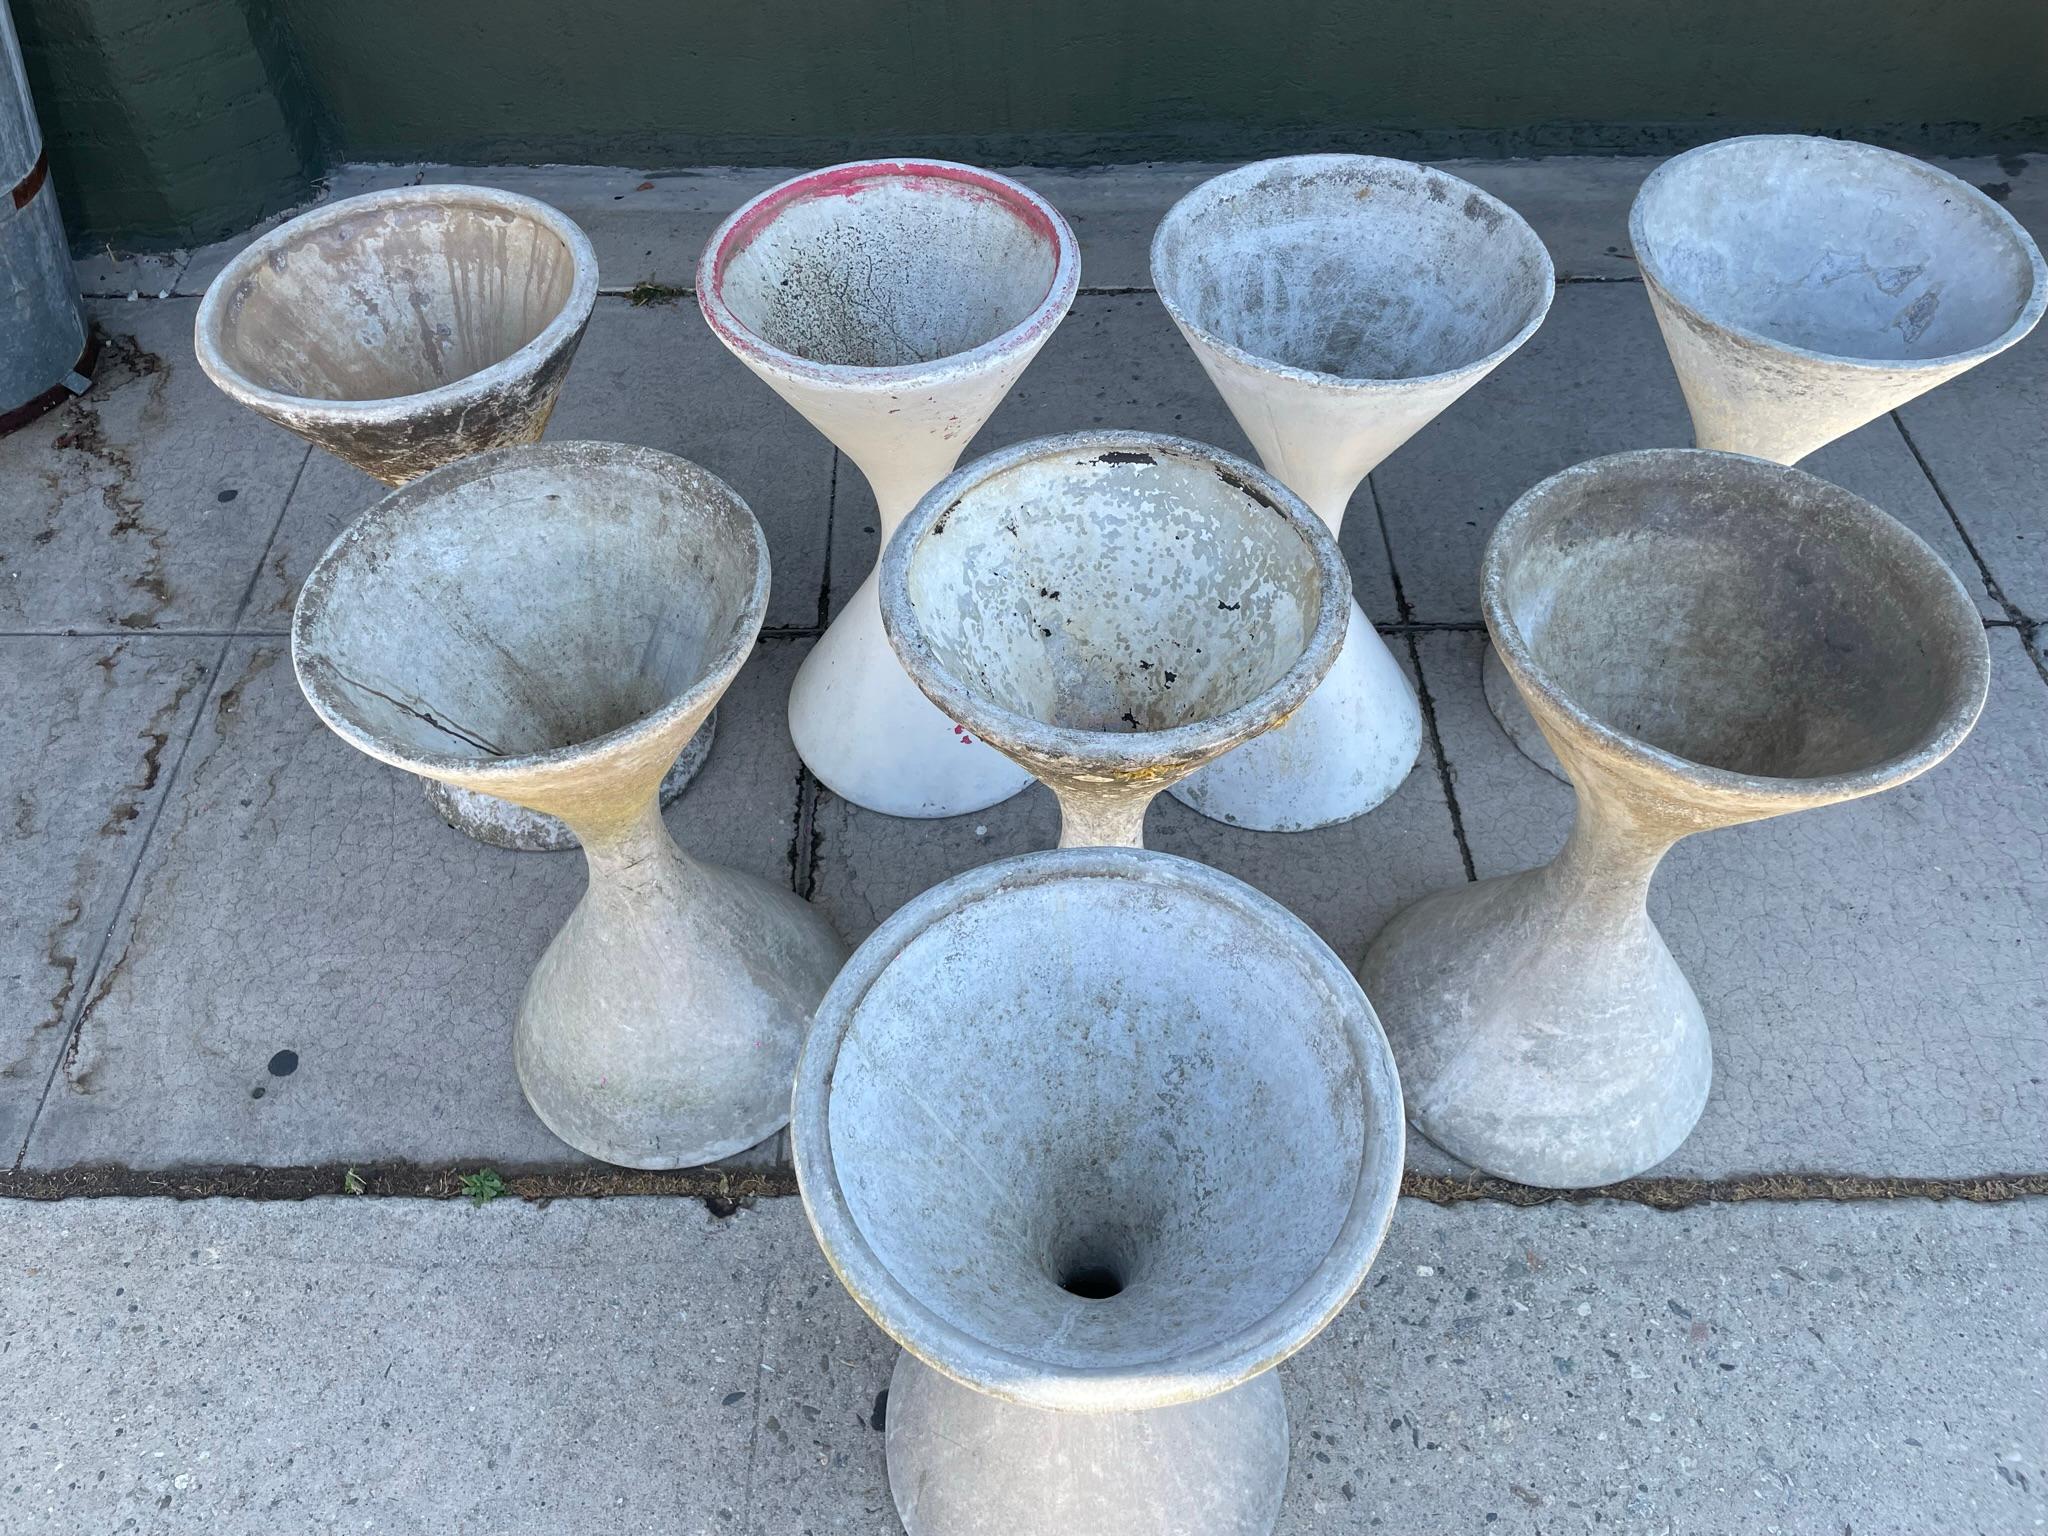 Willy Guhl Diabolo Planters, fiber-reinforced concrete. Switzerland, 1960s. Each item is $1800. Only 3 planters available.